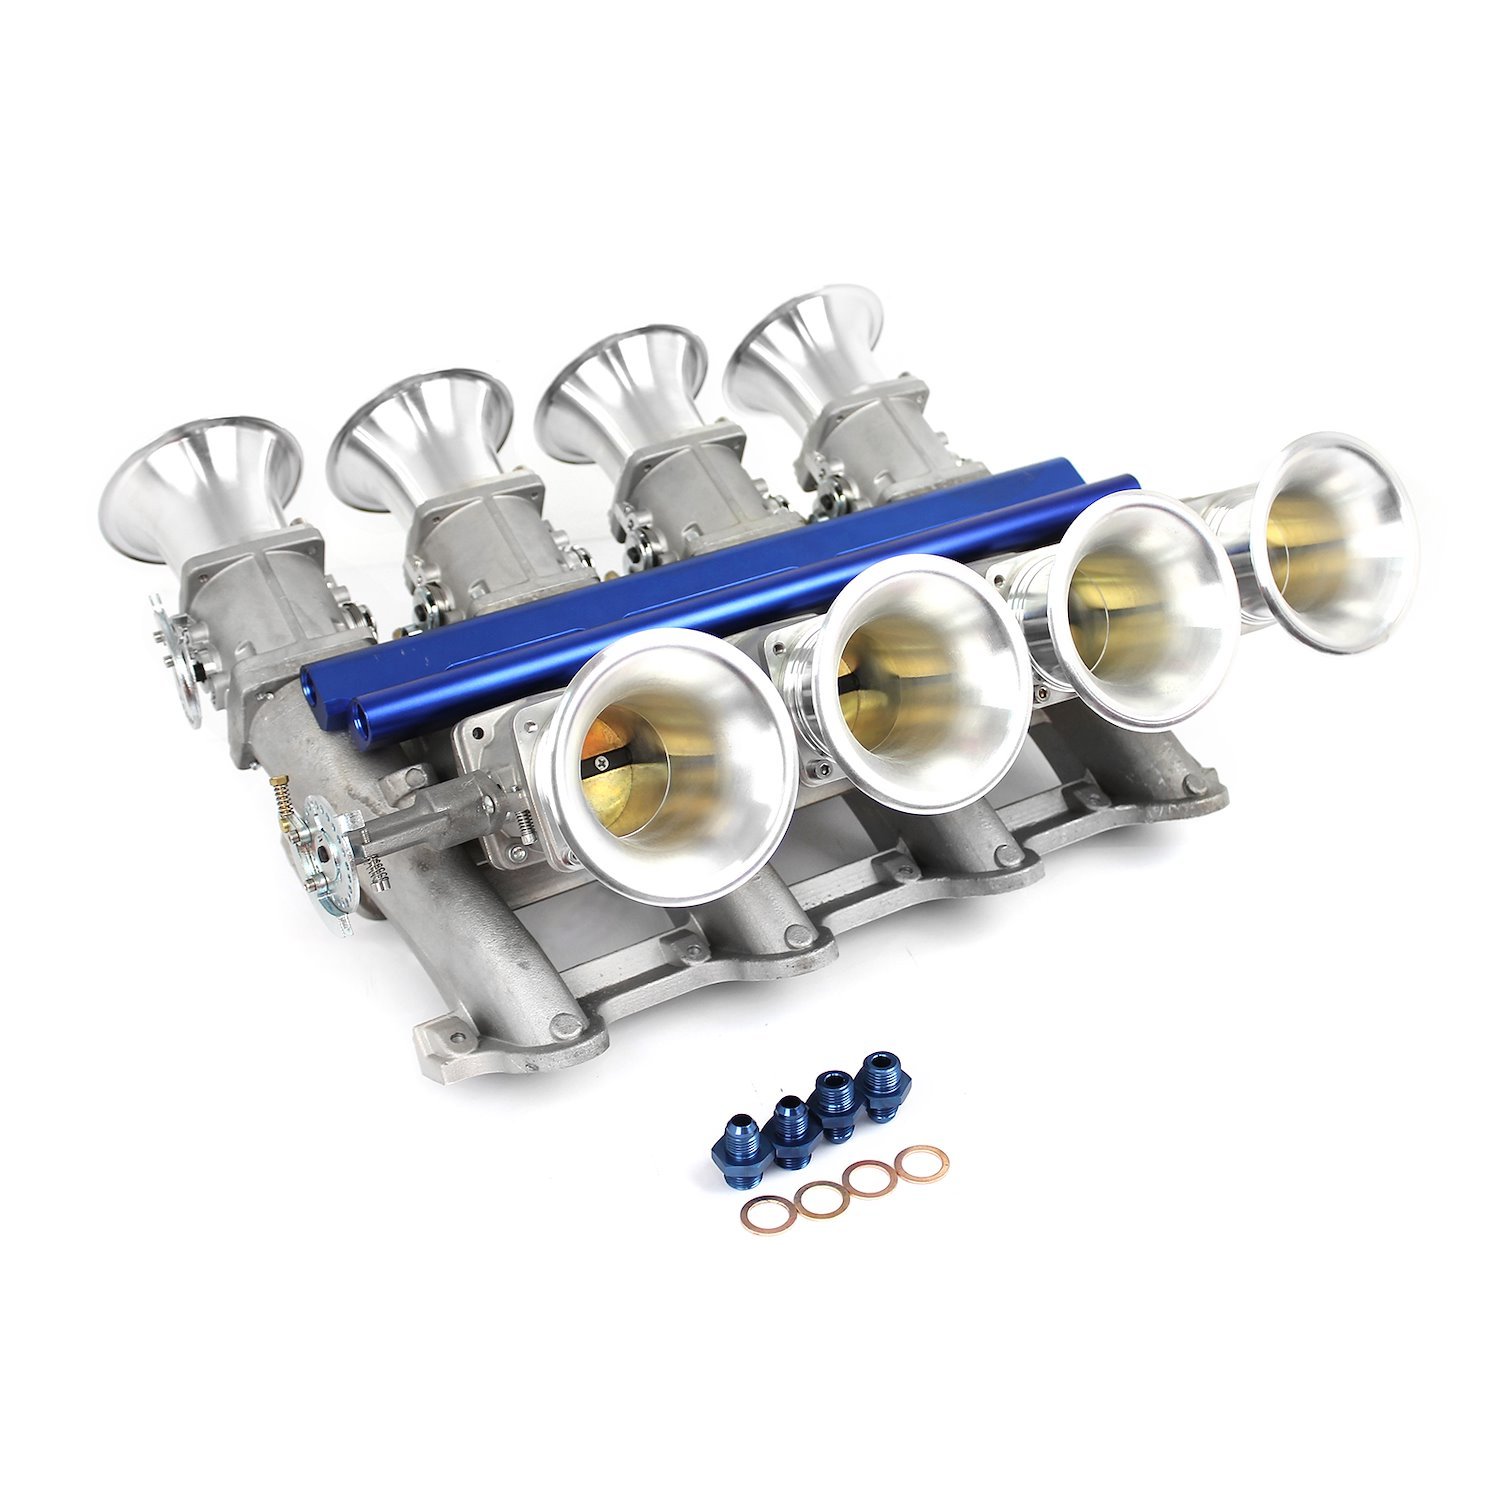 Chevy LS3 Side Draft EFI Stack Intake Manifold System Complete Satin